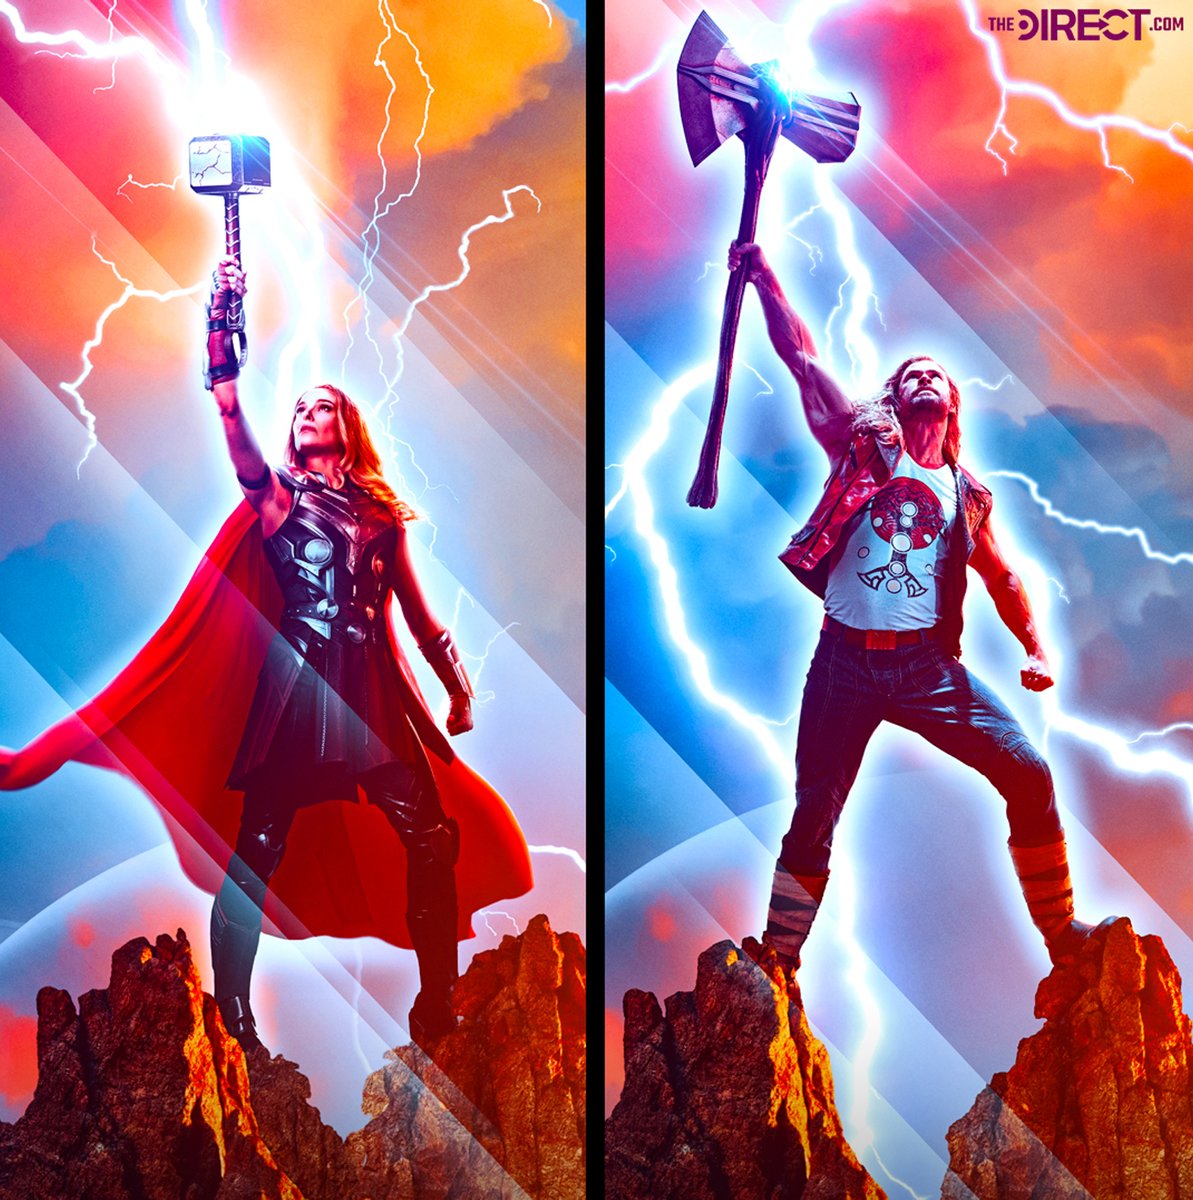 RT @MCU_Direct: Official looks at the THORs in #ThorLoveAndThunder: 
https://t.co/THaPMHKu3Q https://t.co/mv8CxxxuwR